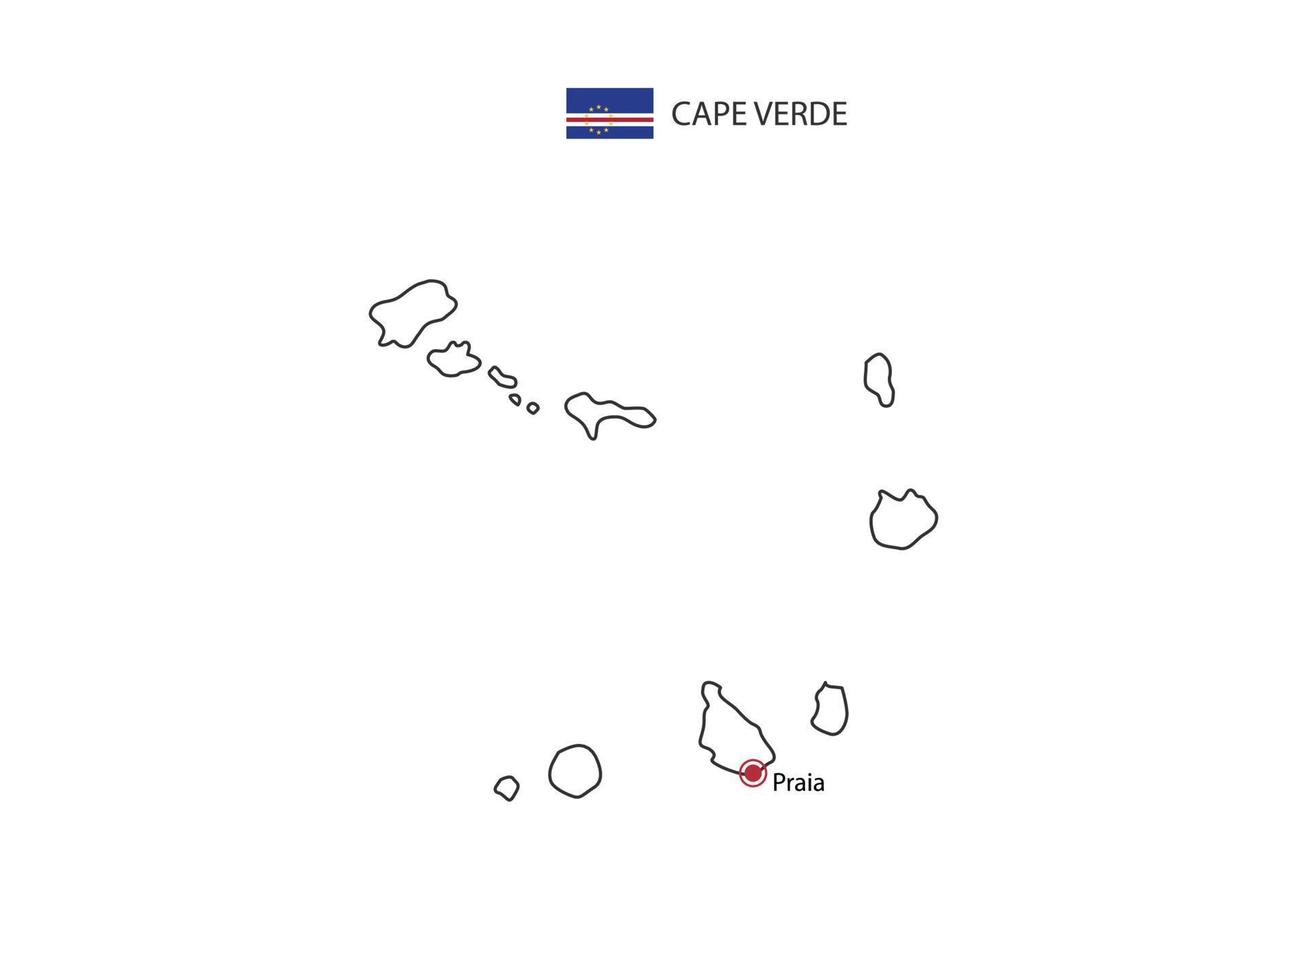 Hand draw thin black line vector of Cape Verde Map with capital city Praia on white background.